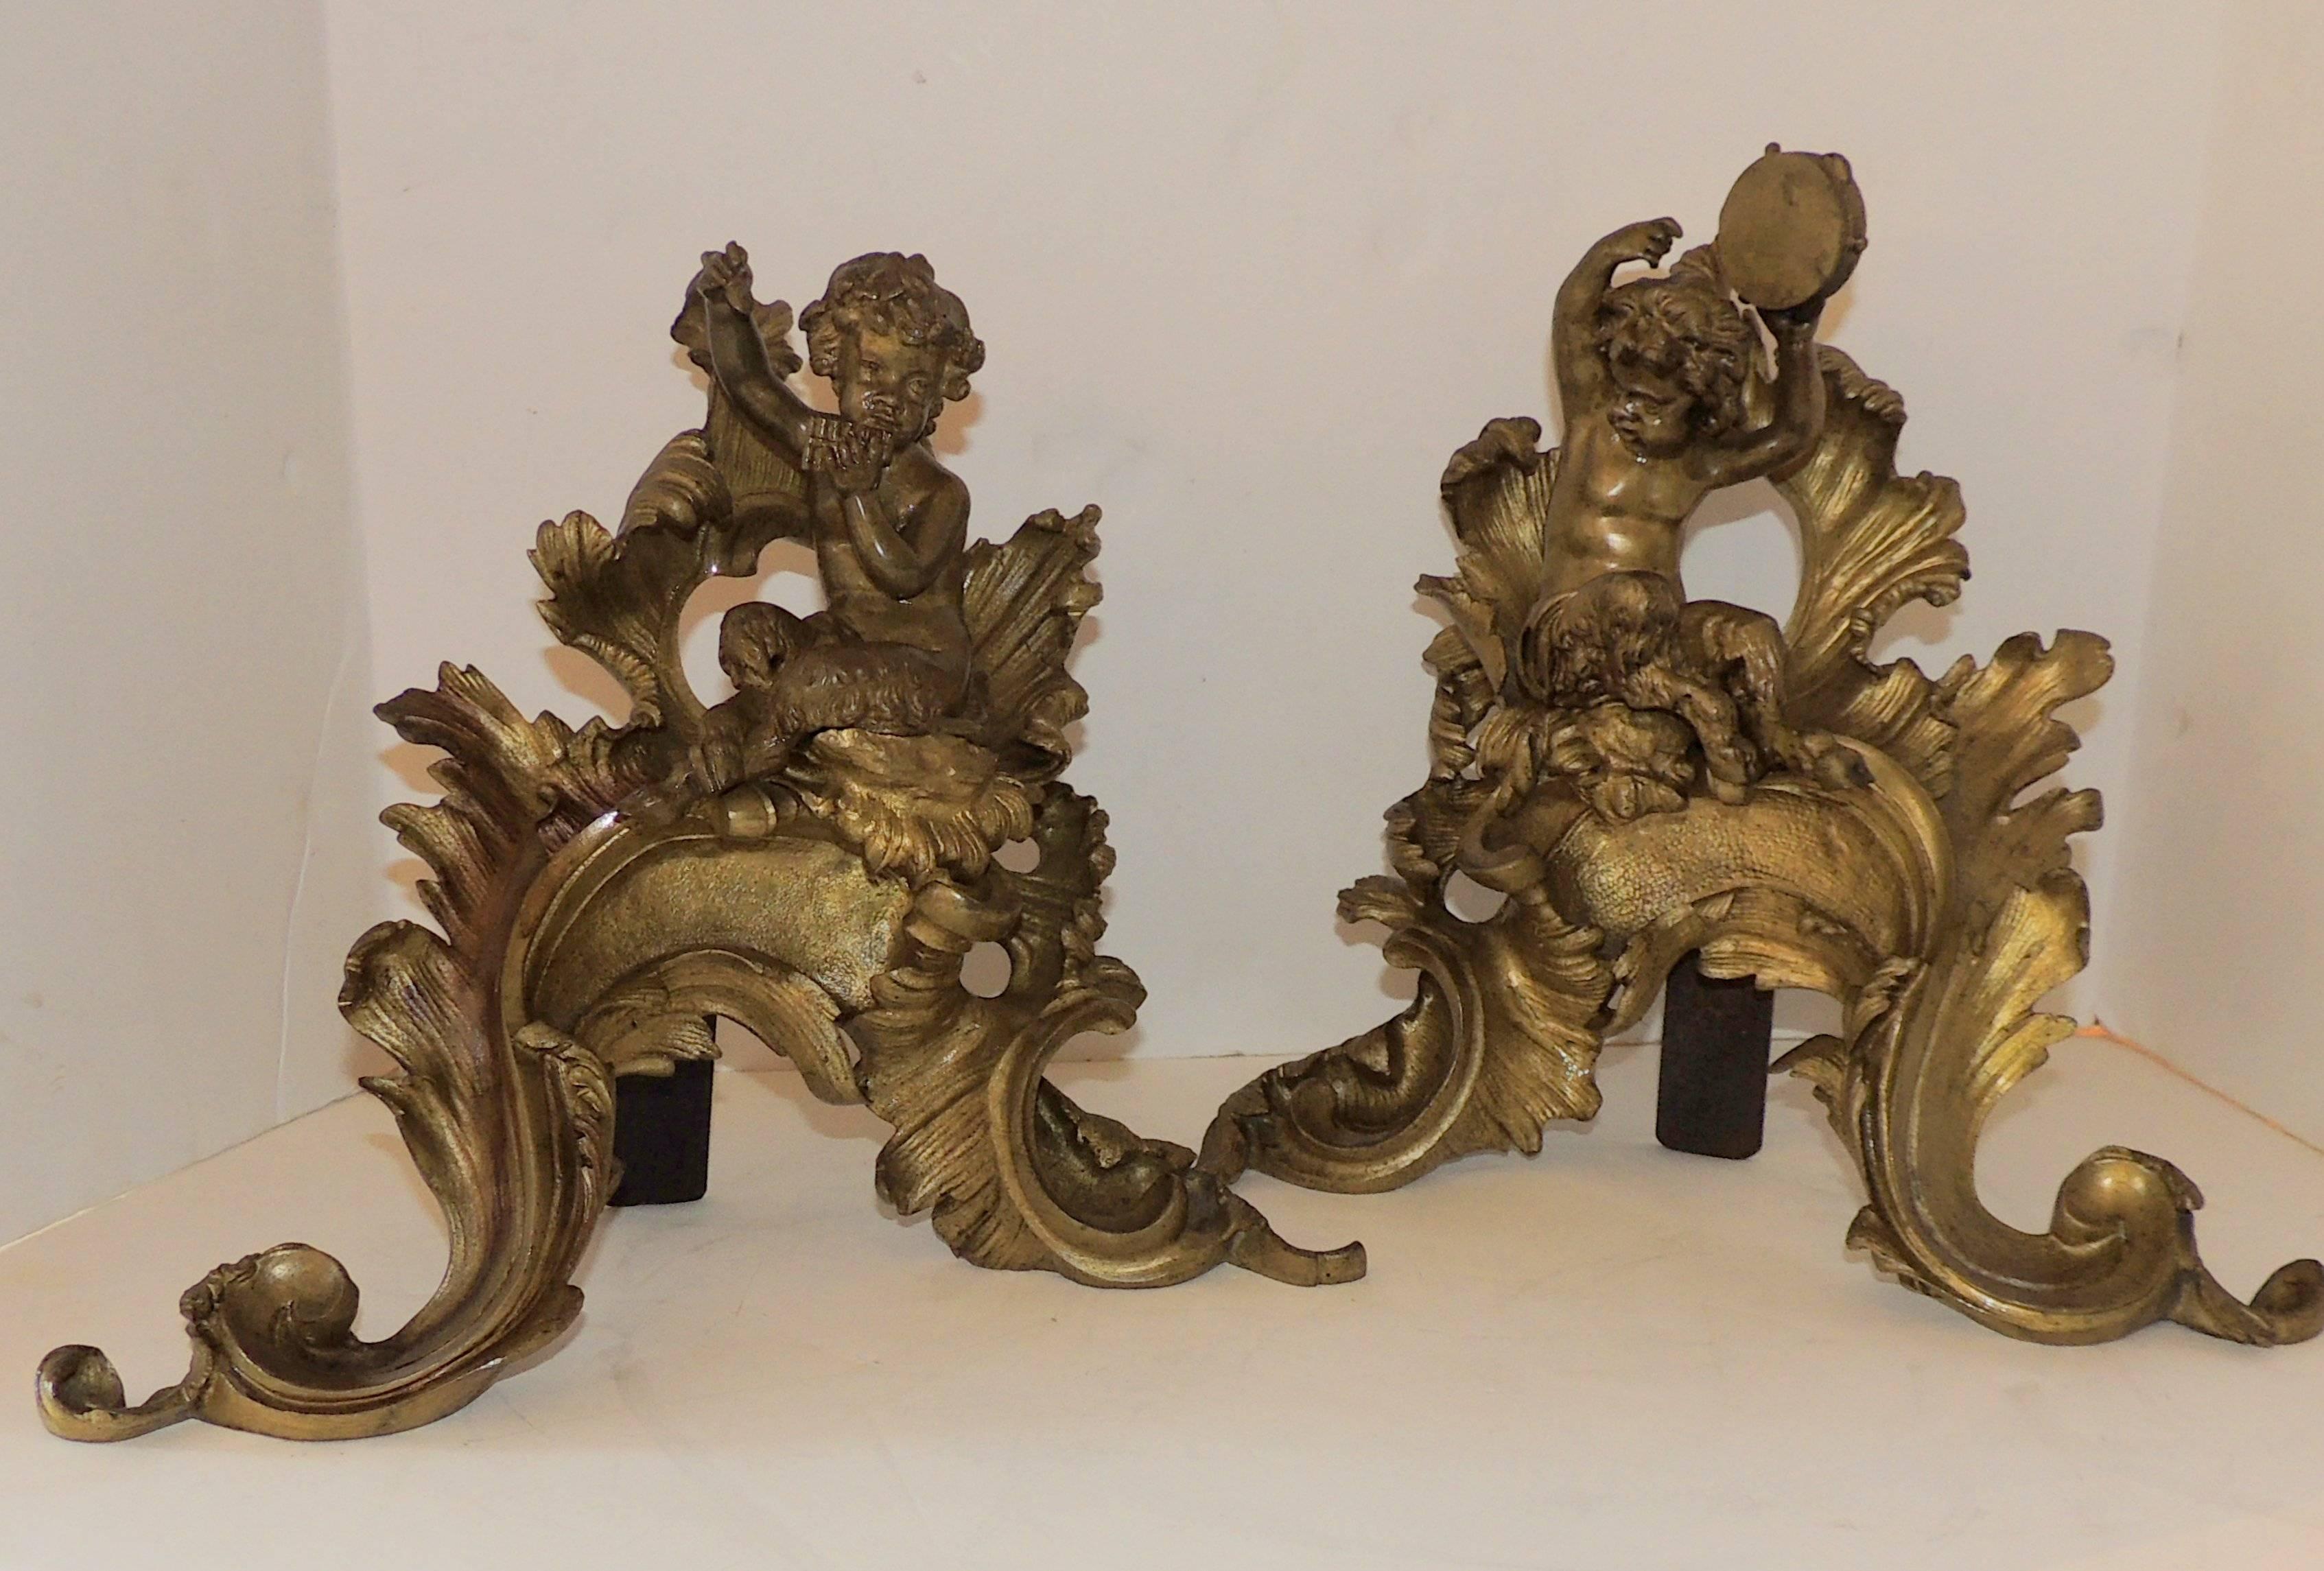 Wonderful French gilt bronze cherub putti fireplace fire place chenets andirons playing musical instruments.

Measures: 14" W x 12" W x 7" D.